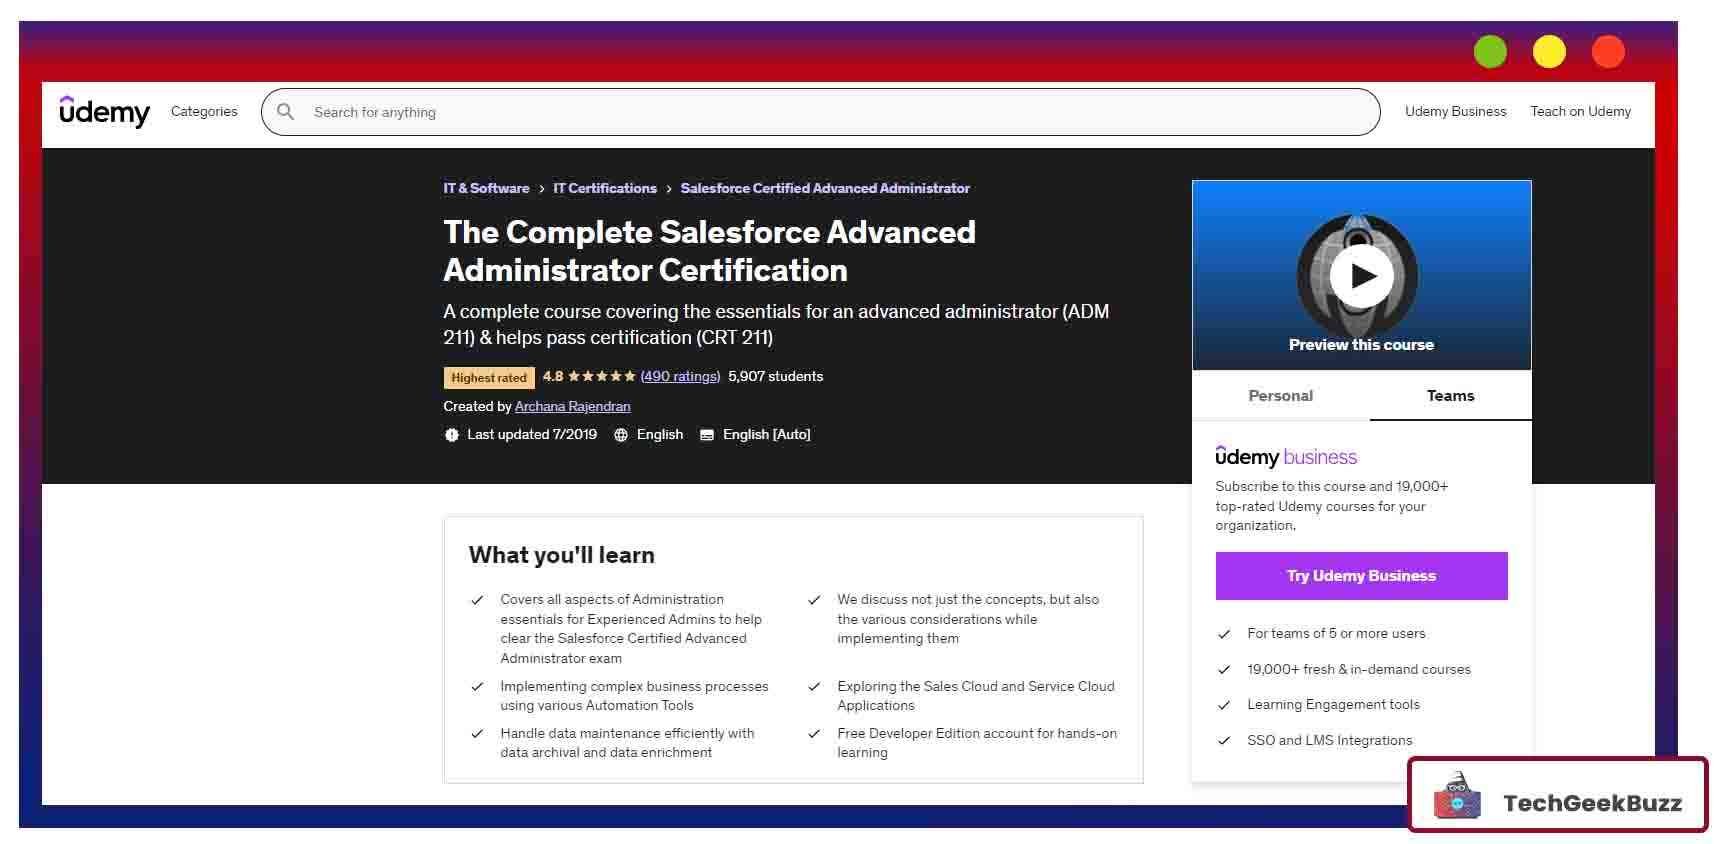  The Complete Salesforce Advanced Administrator Certification